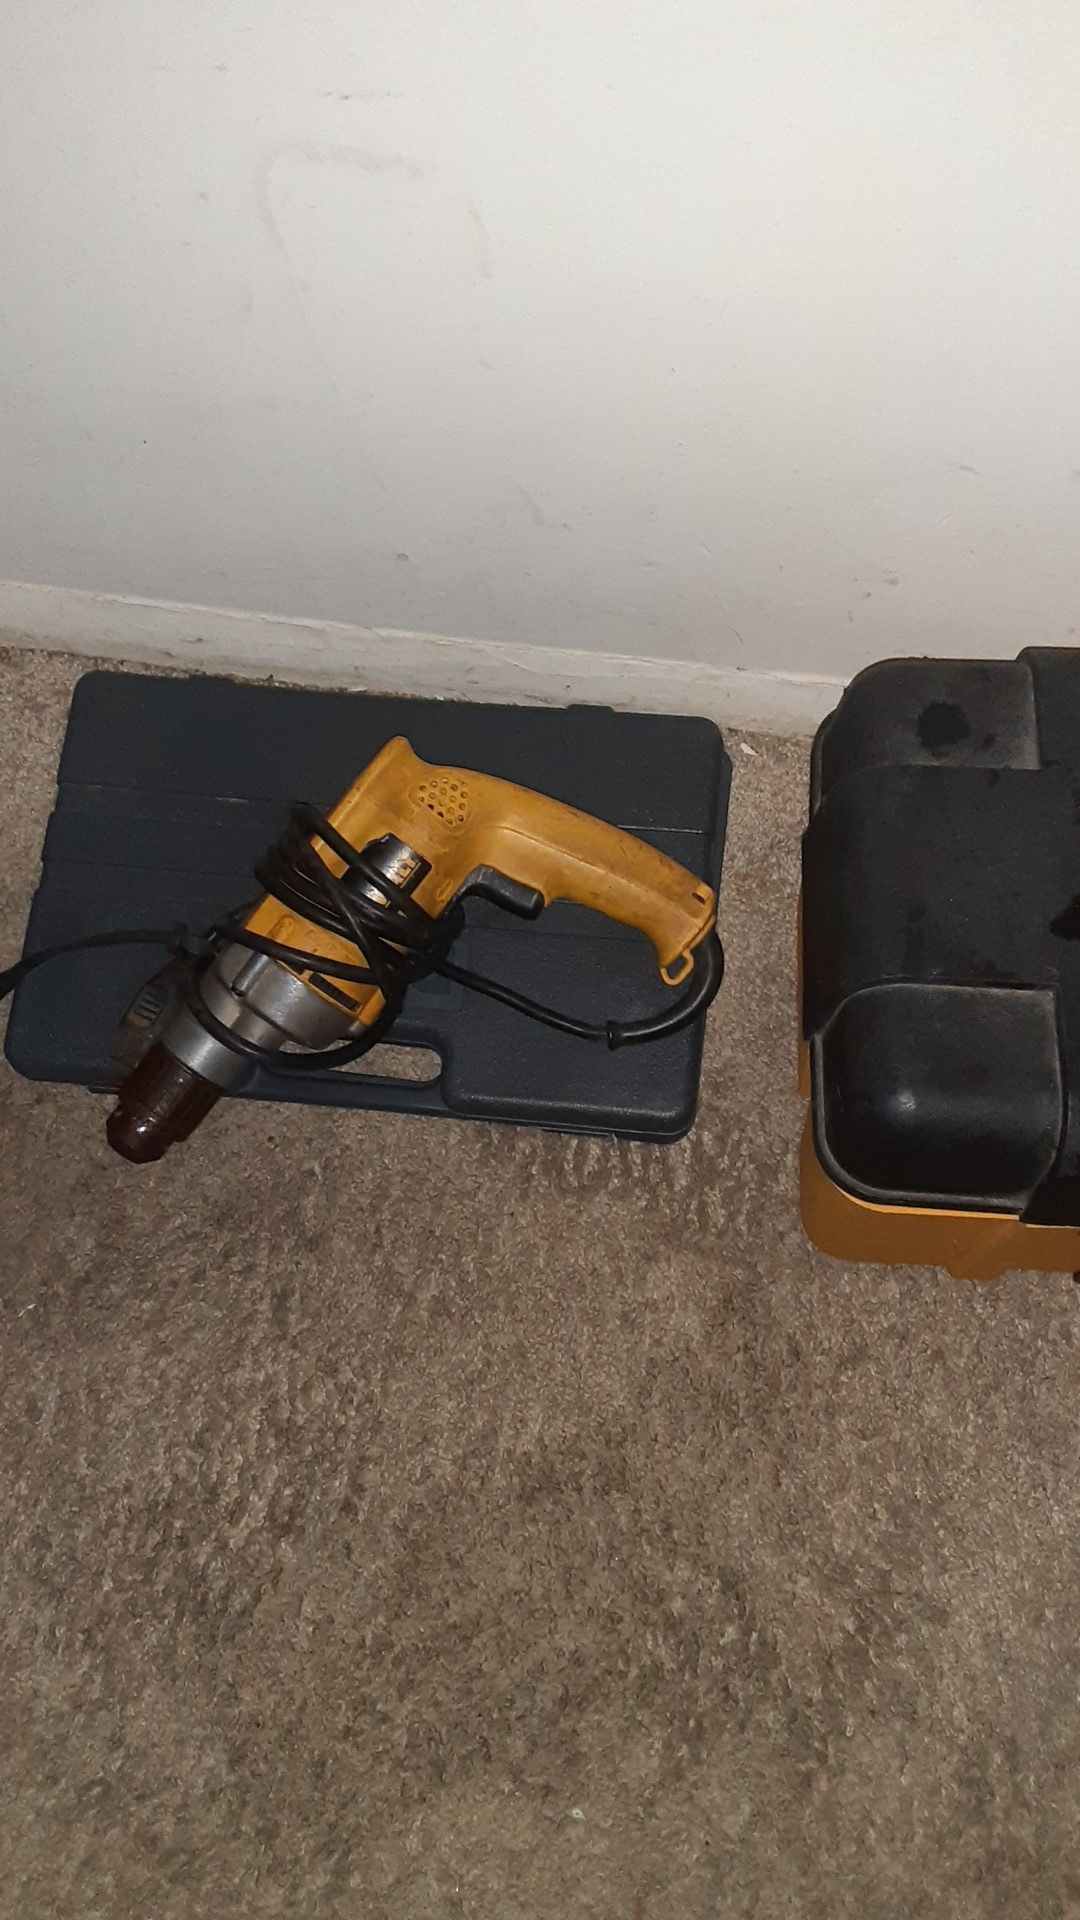 Various tools dewalt power drill tool boPxes with tools inside